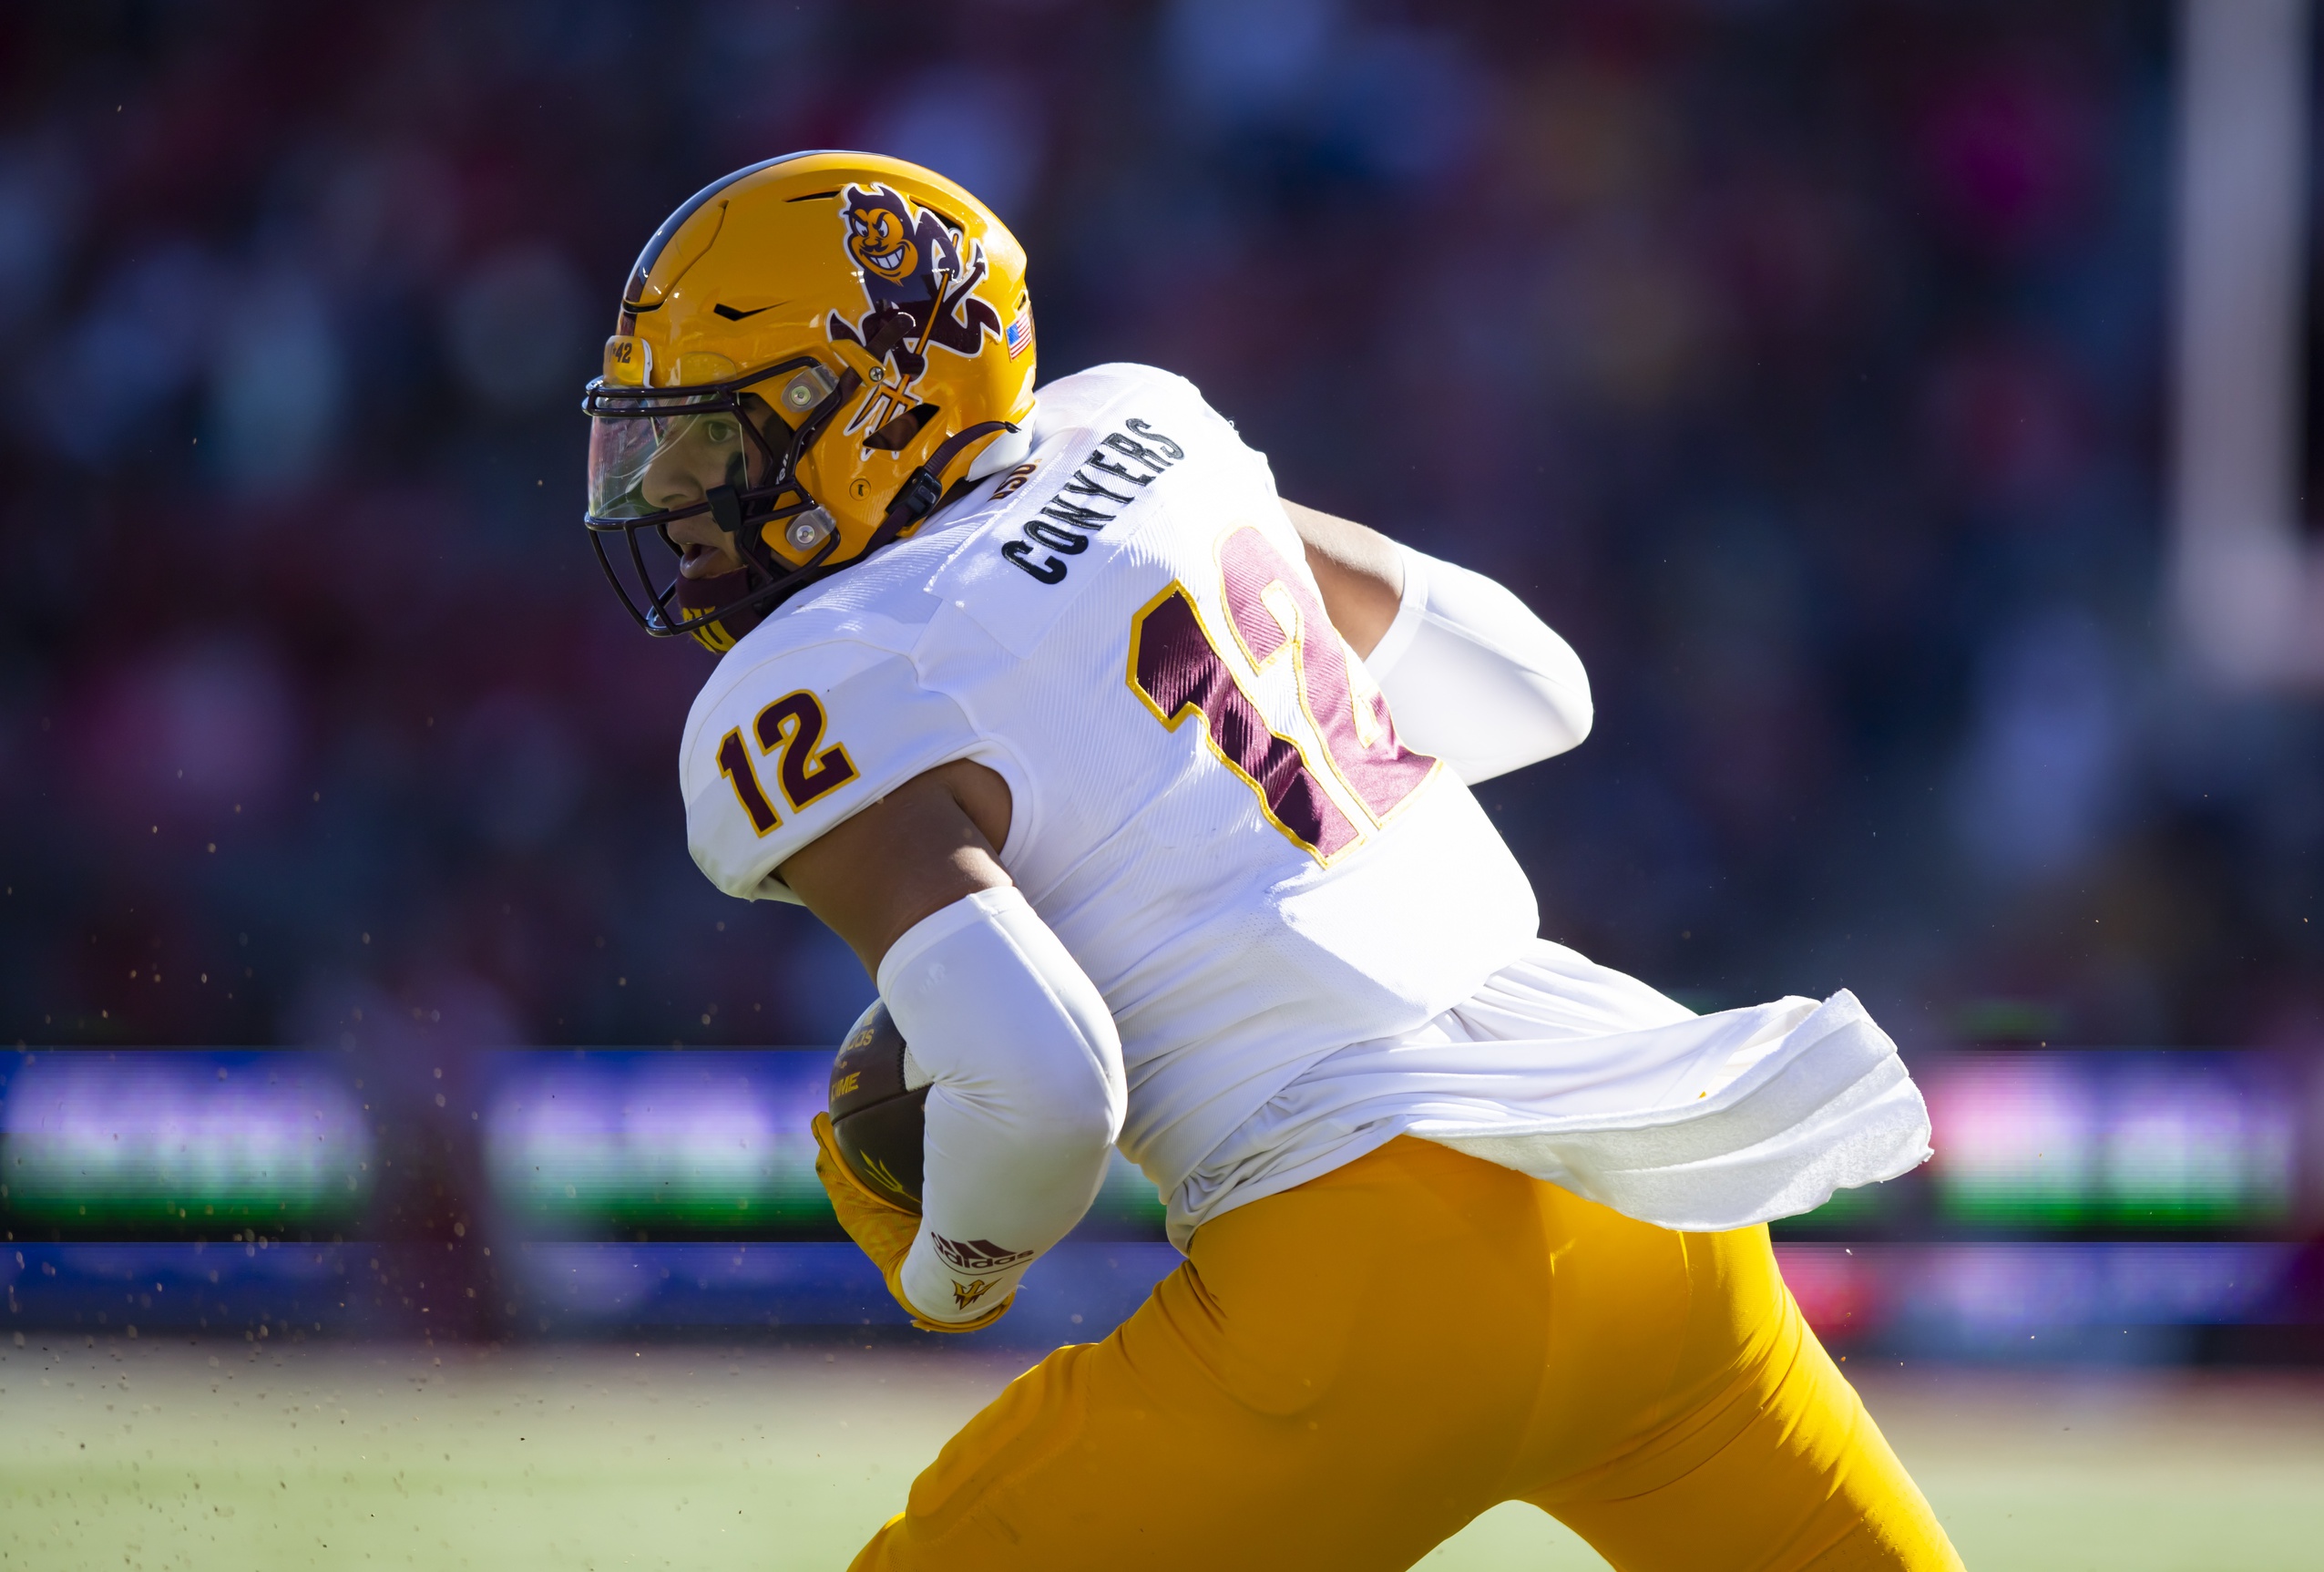 Arizona State Sun Devils Preview: Roster, Prospects, Schedule, and